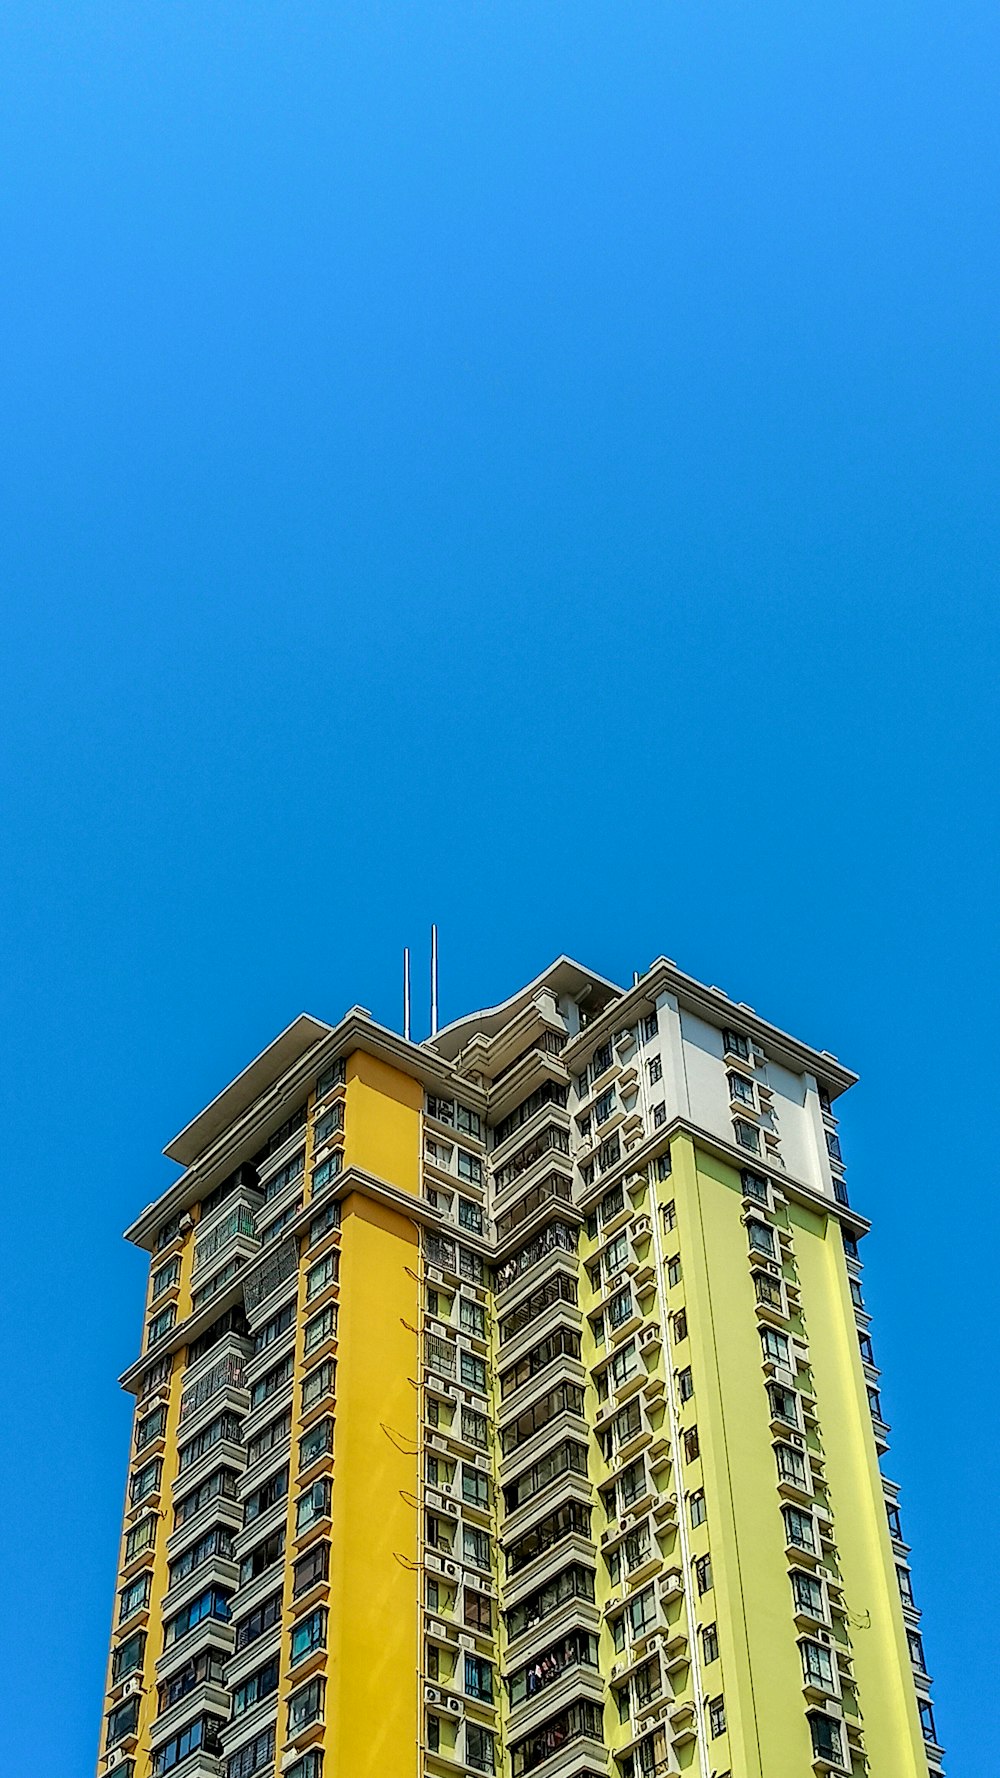 yellow and white concrete building under blue sky during daytime